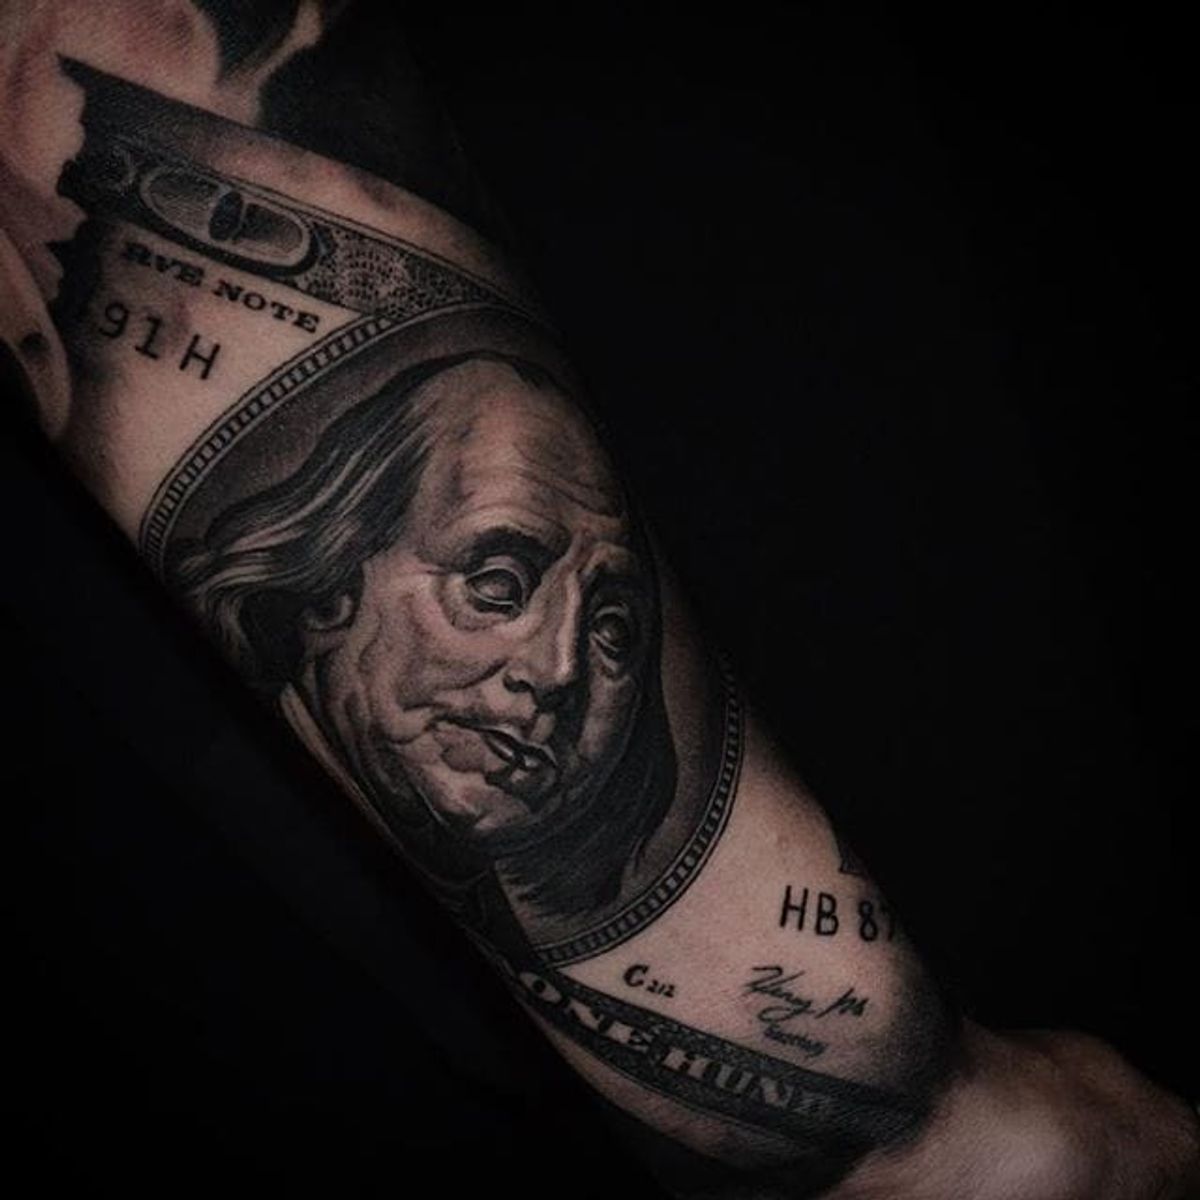 Tattoo Uploaded By Stacie Mayer Benjamin Franklin On The Us 100 Bill By Ben Thomas Realism Blackandgrey Blackandgreyrealism Portrait Benthomas Benjaminfranklin Tattoodo